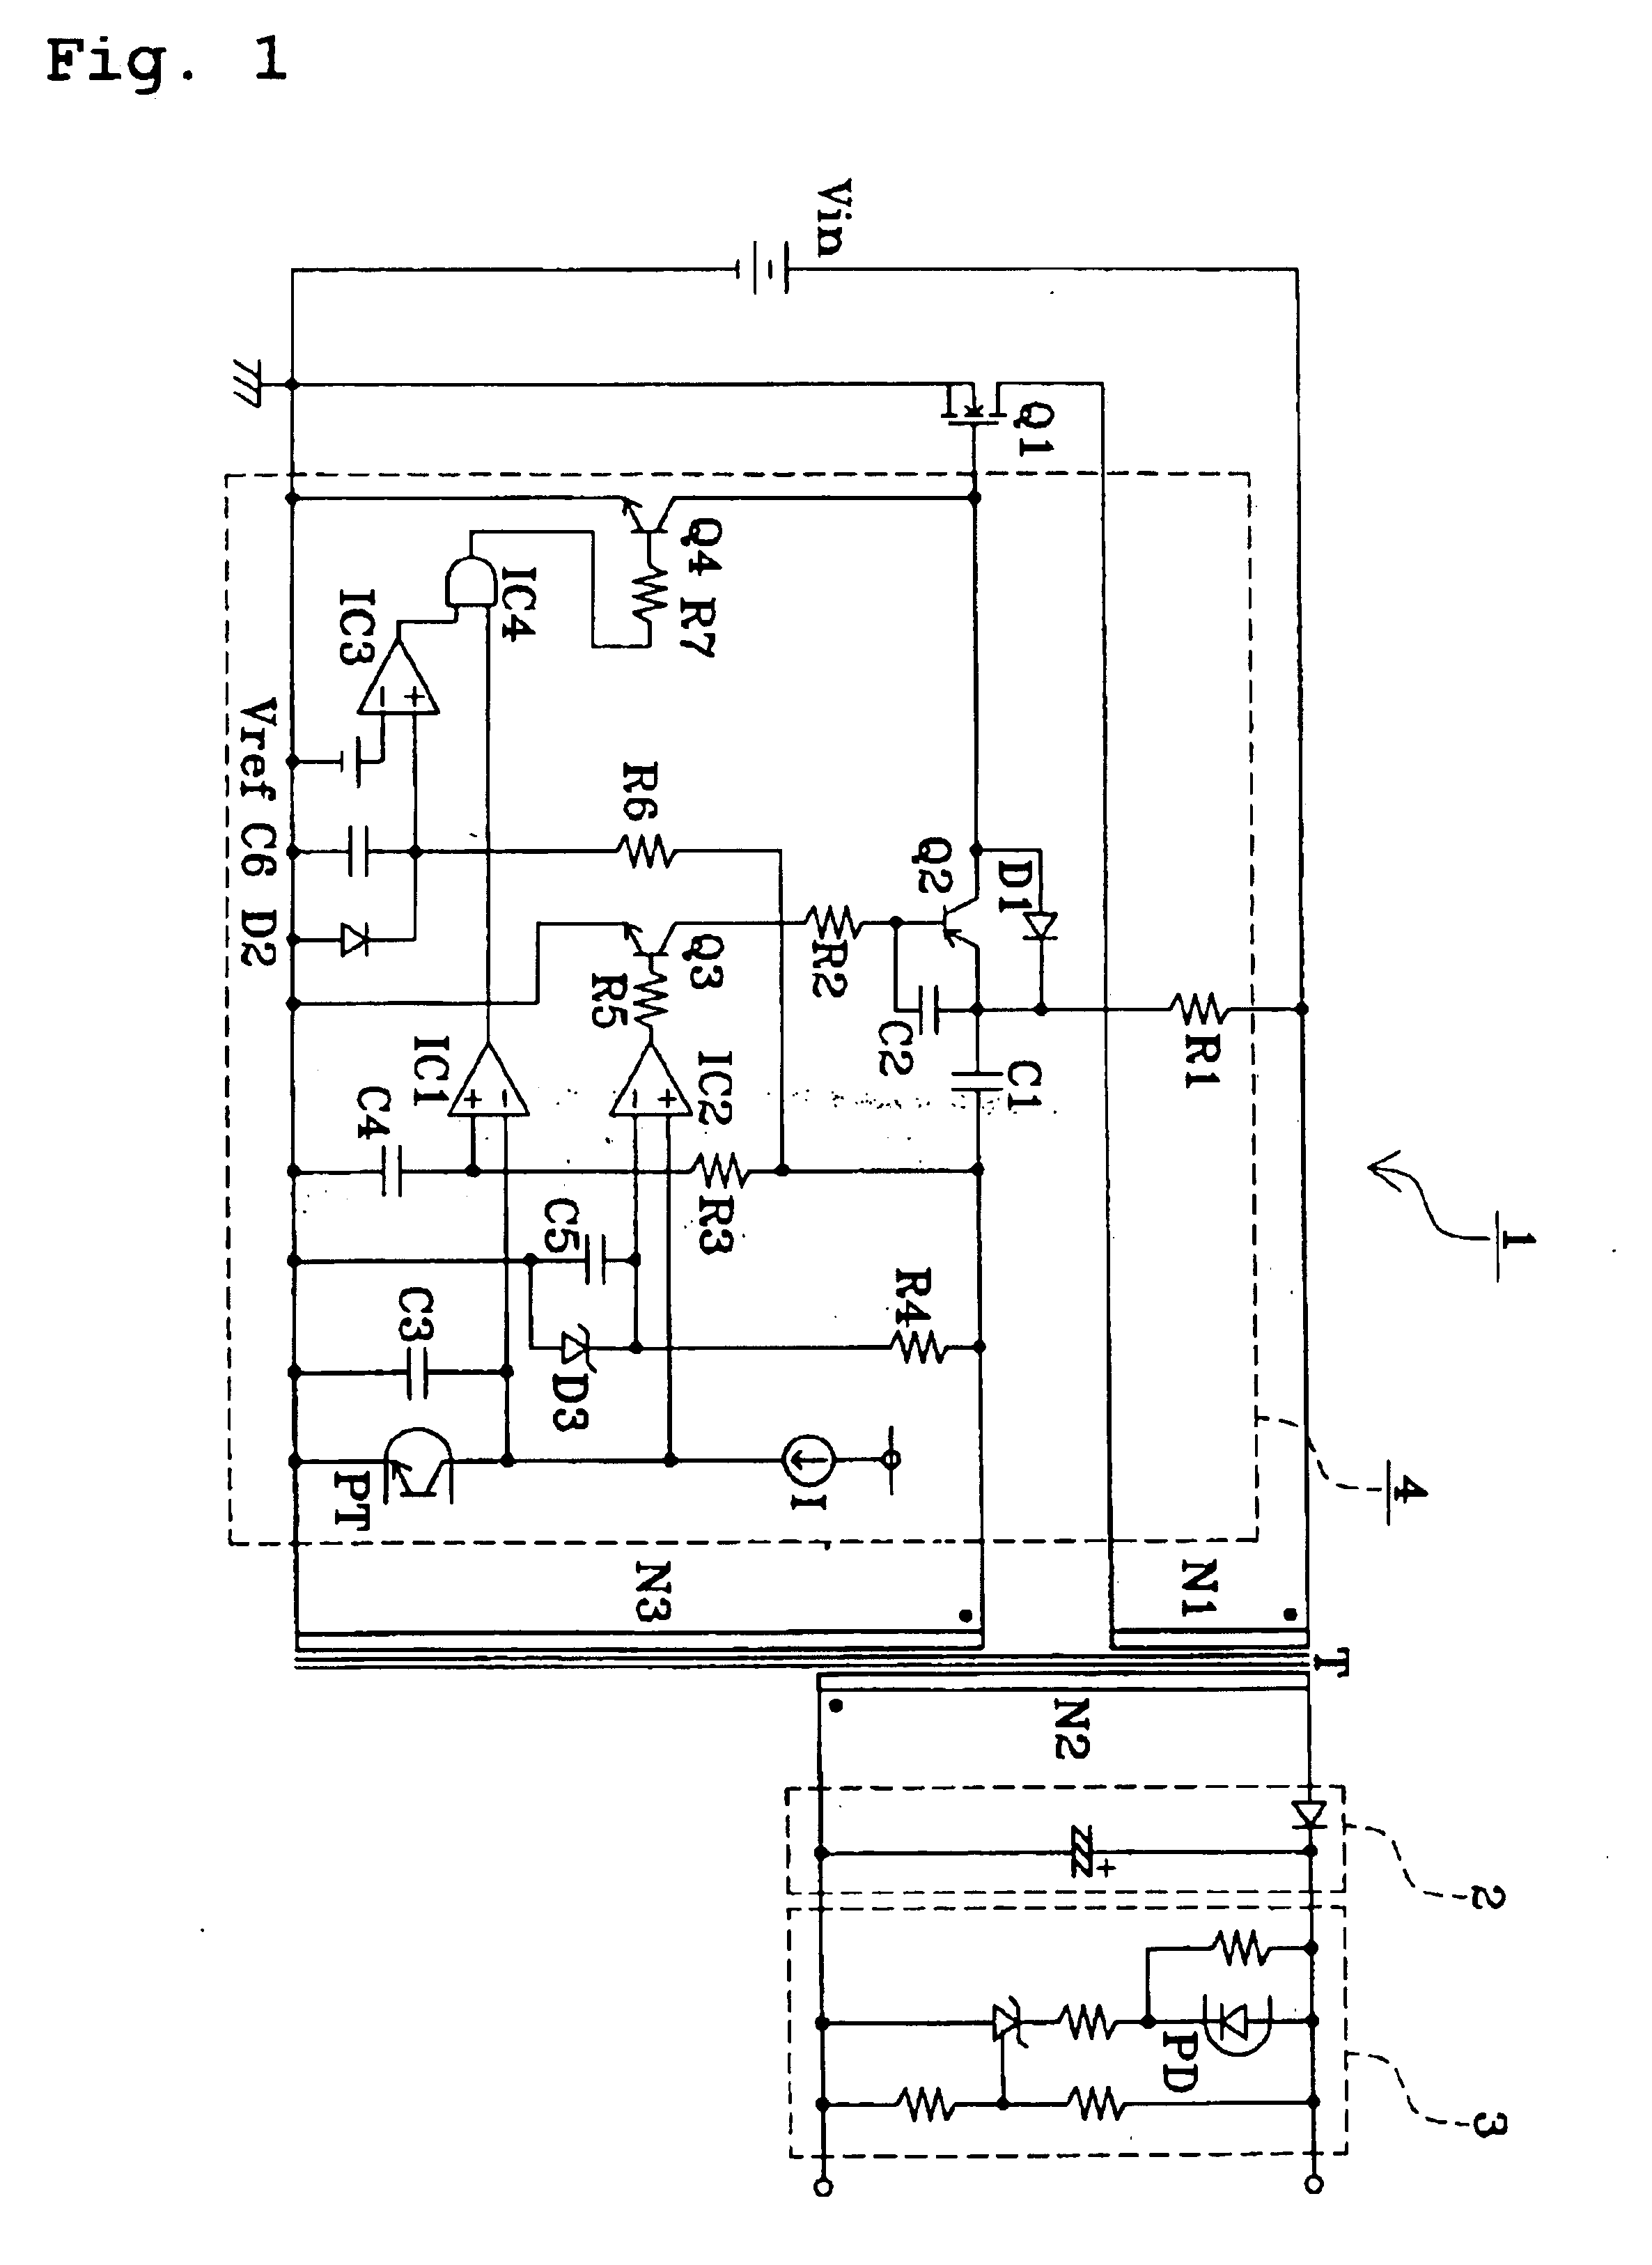 Fly-back converter with constant pulse width and variable duty cycle using a capacitor in control circuit